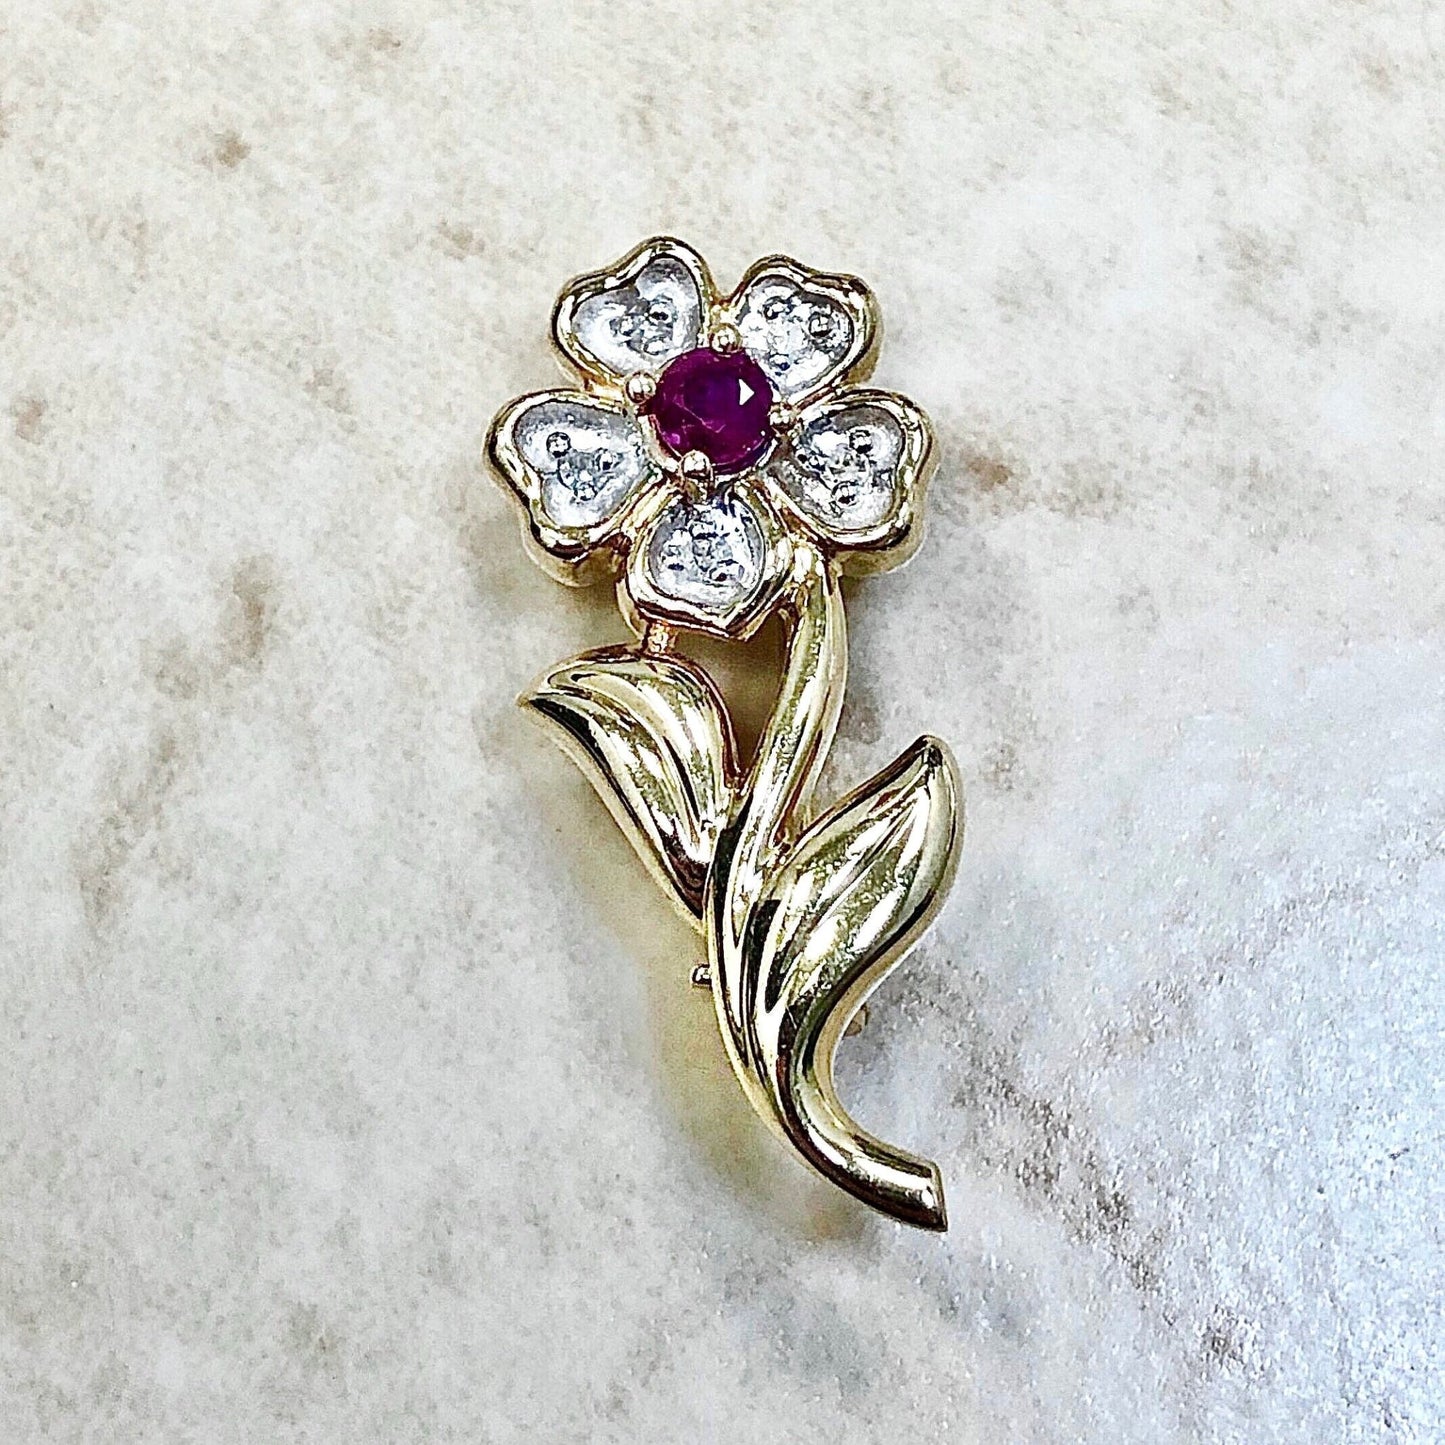 A lovely brooch crafted in 14 karat yellow gold set in the center with a round ruby. It is haloed with 5 round diamonds. The brooch was designed as a flower.